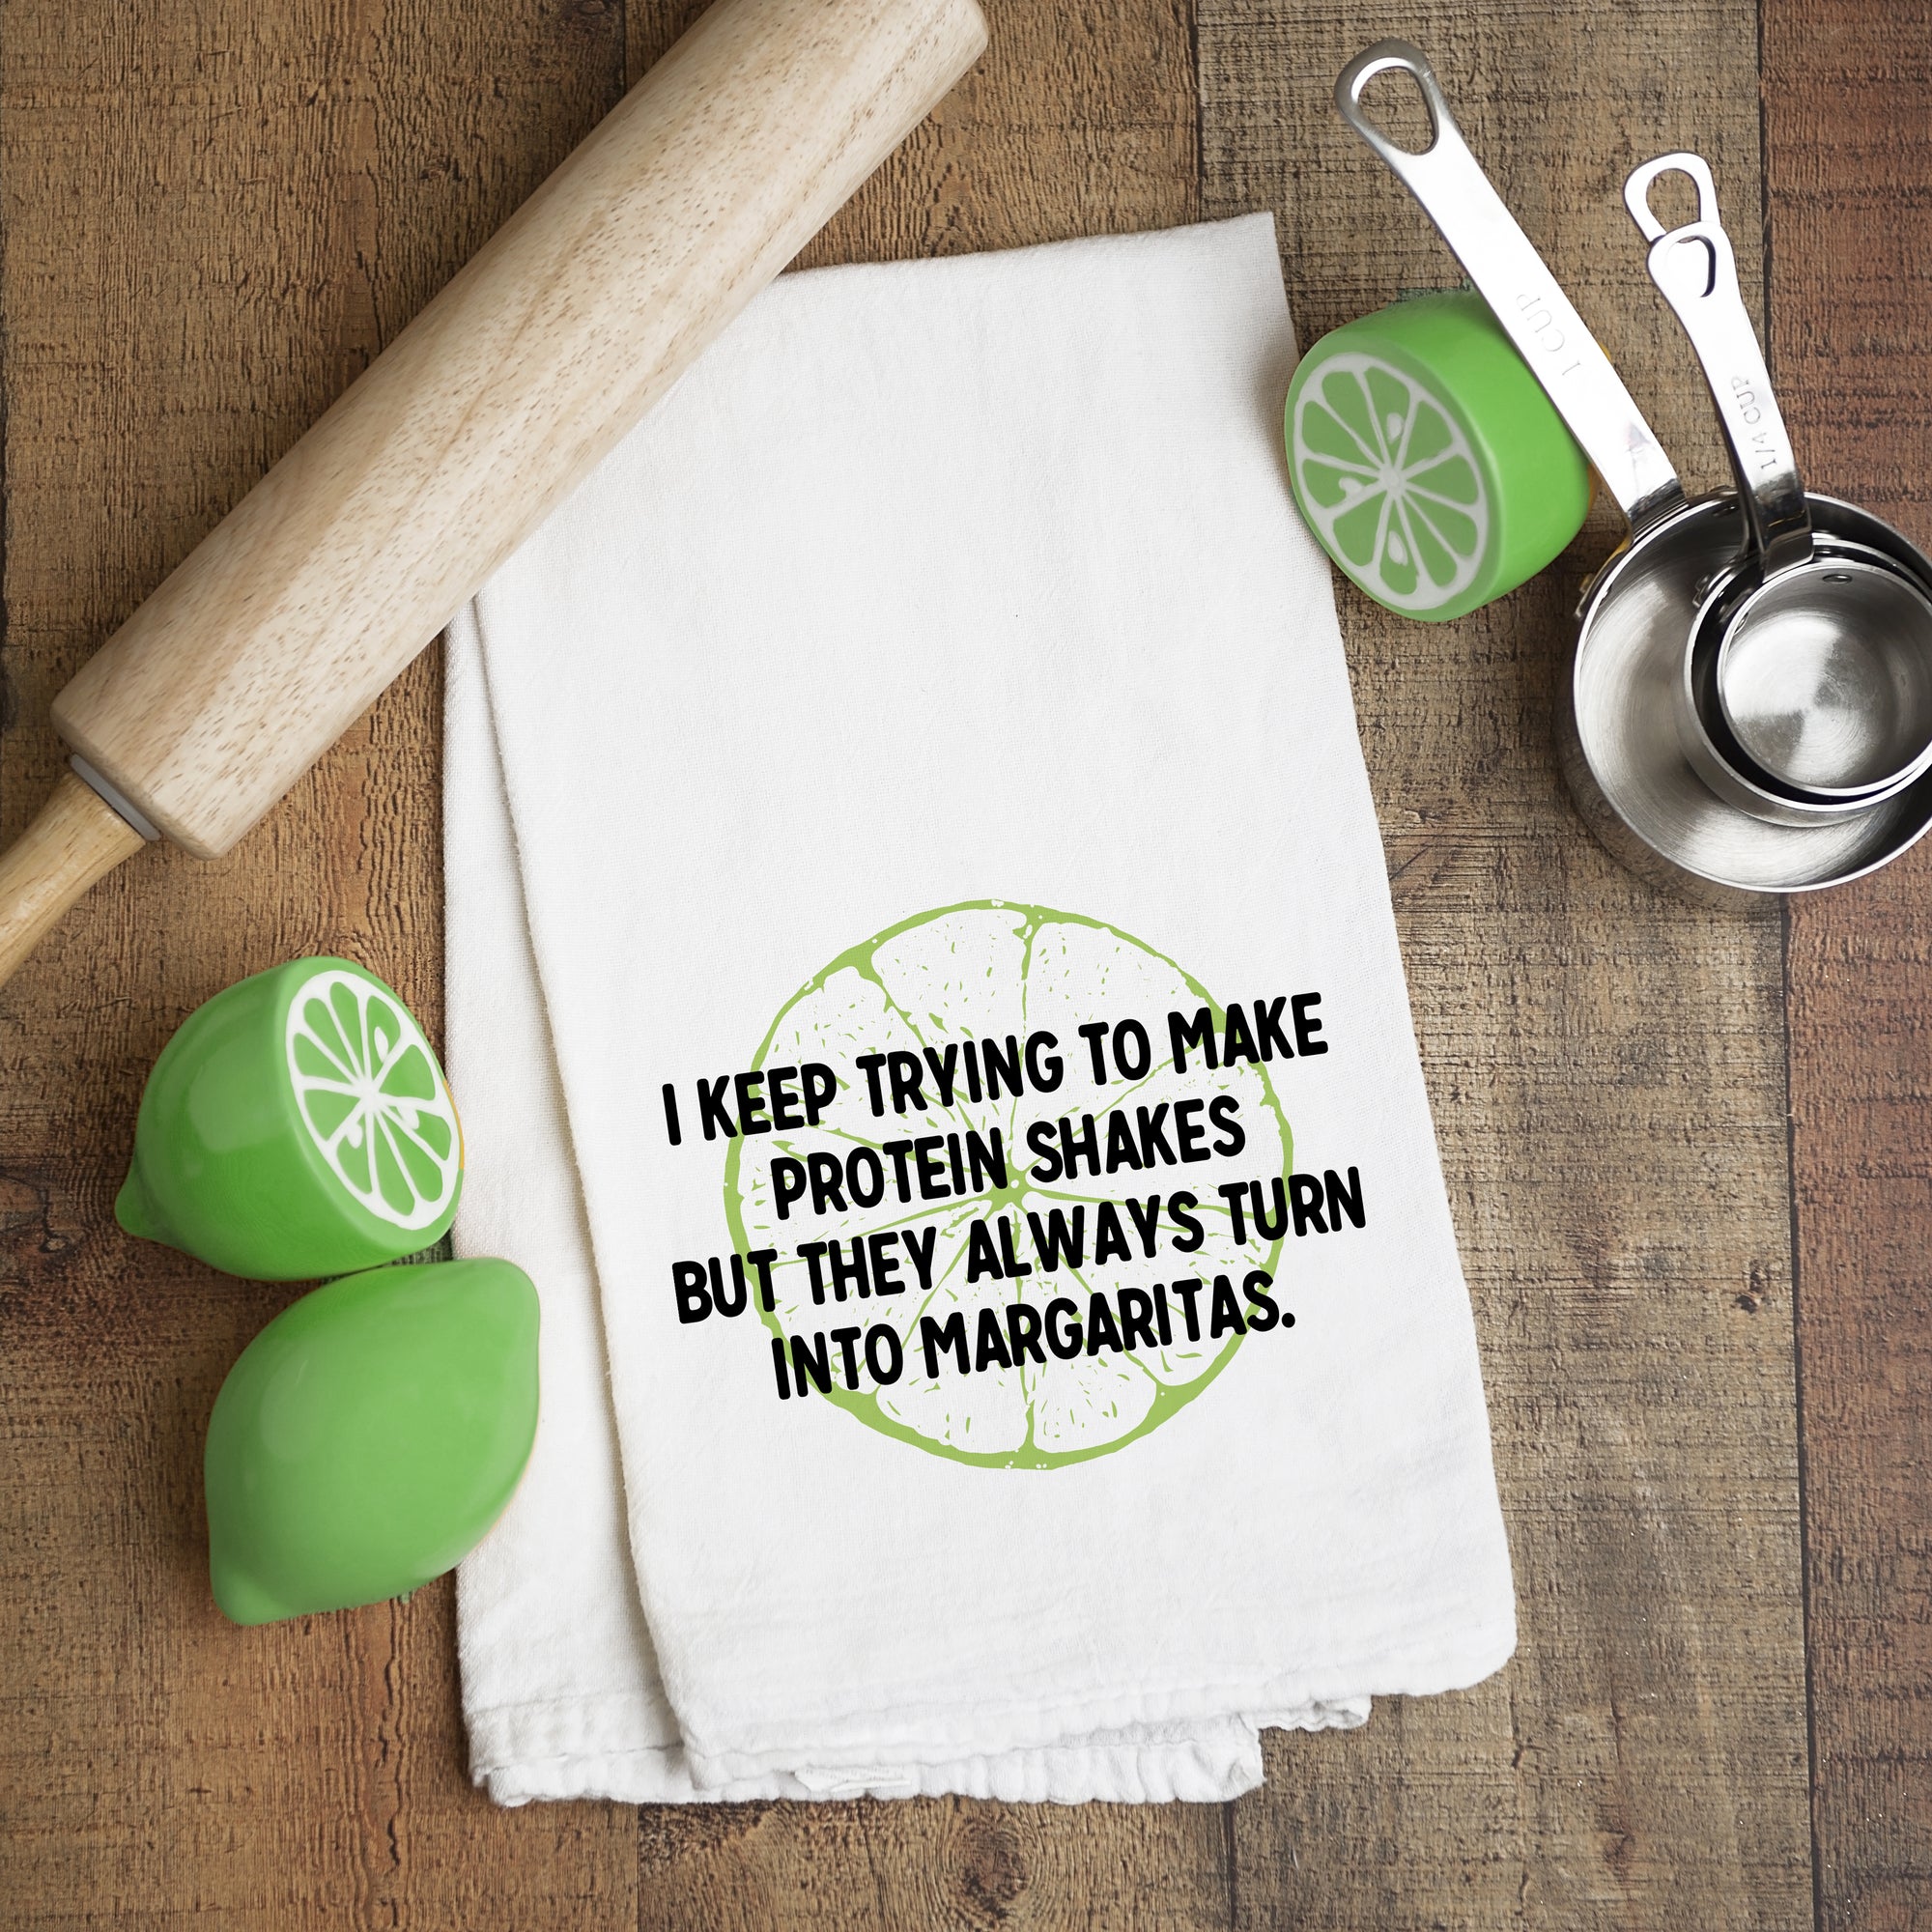 "I keep trying to make protein shakes, but they always turn into margaritas" tea towel, Pipsy.com